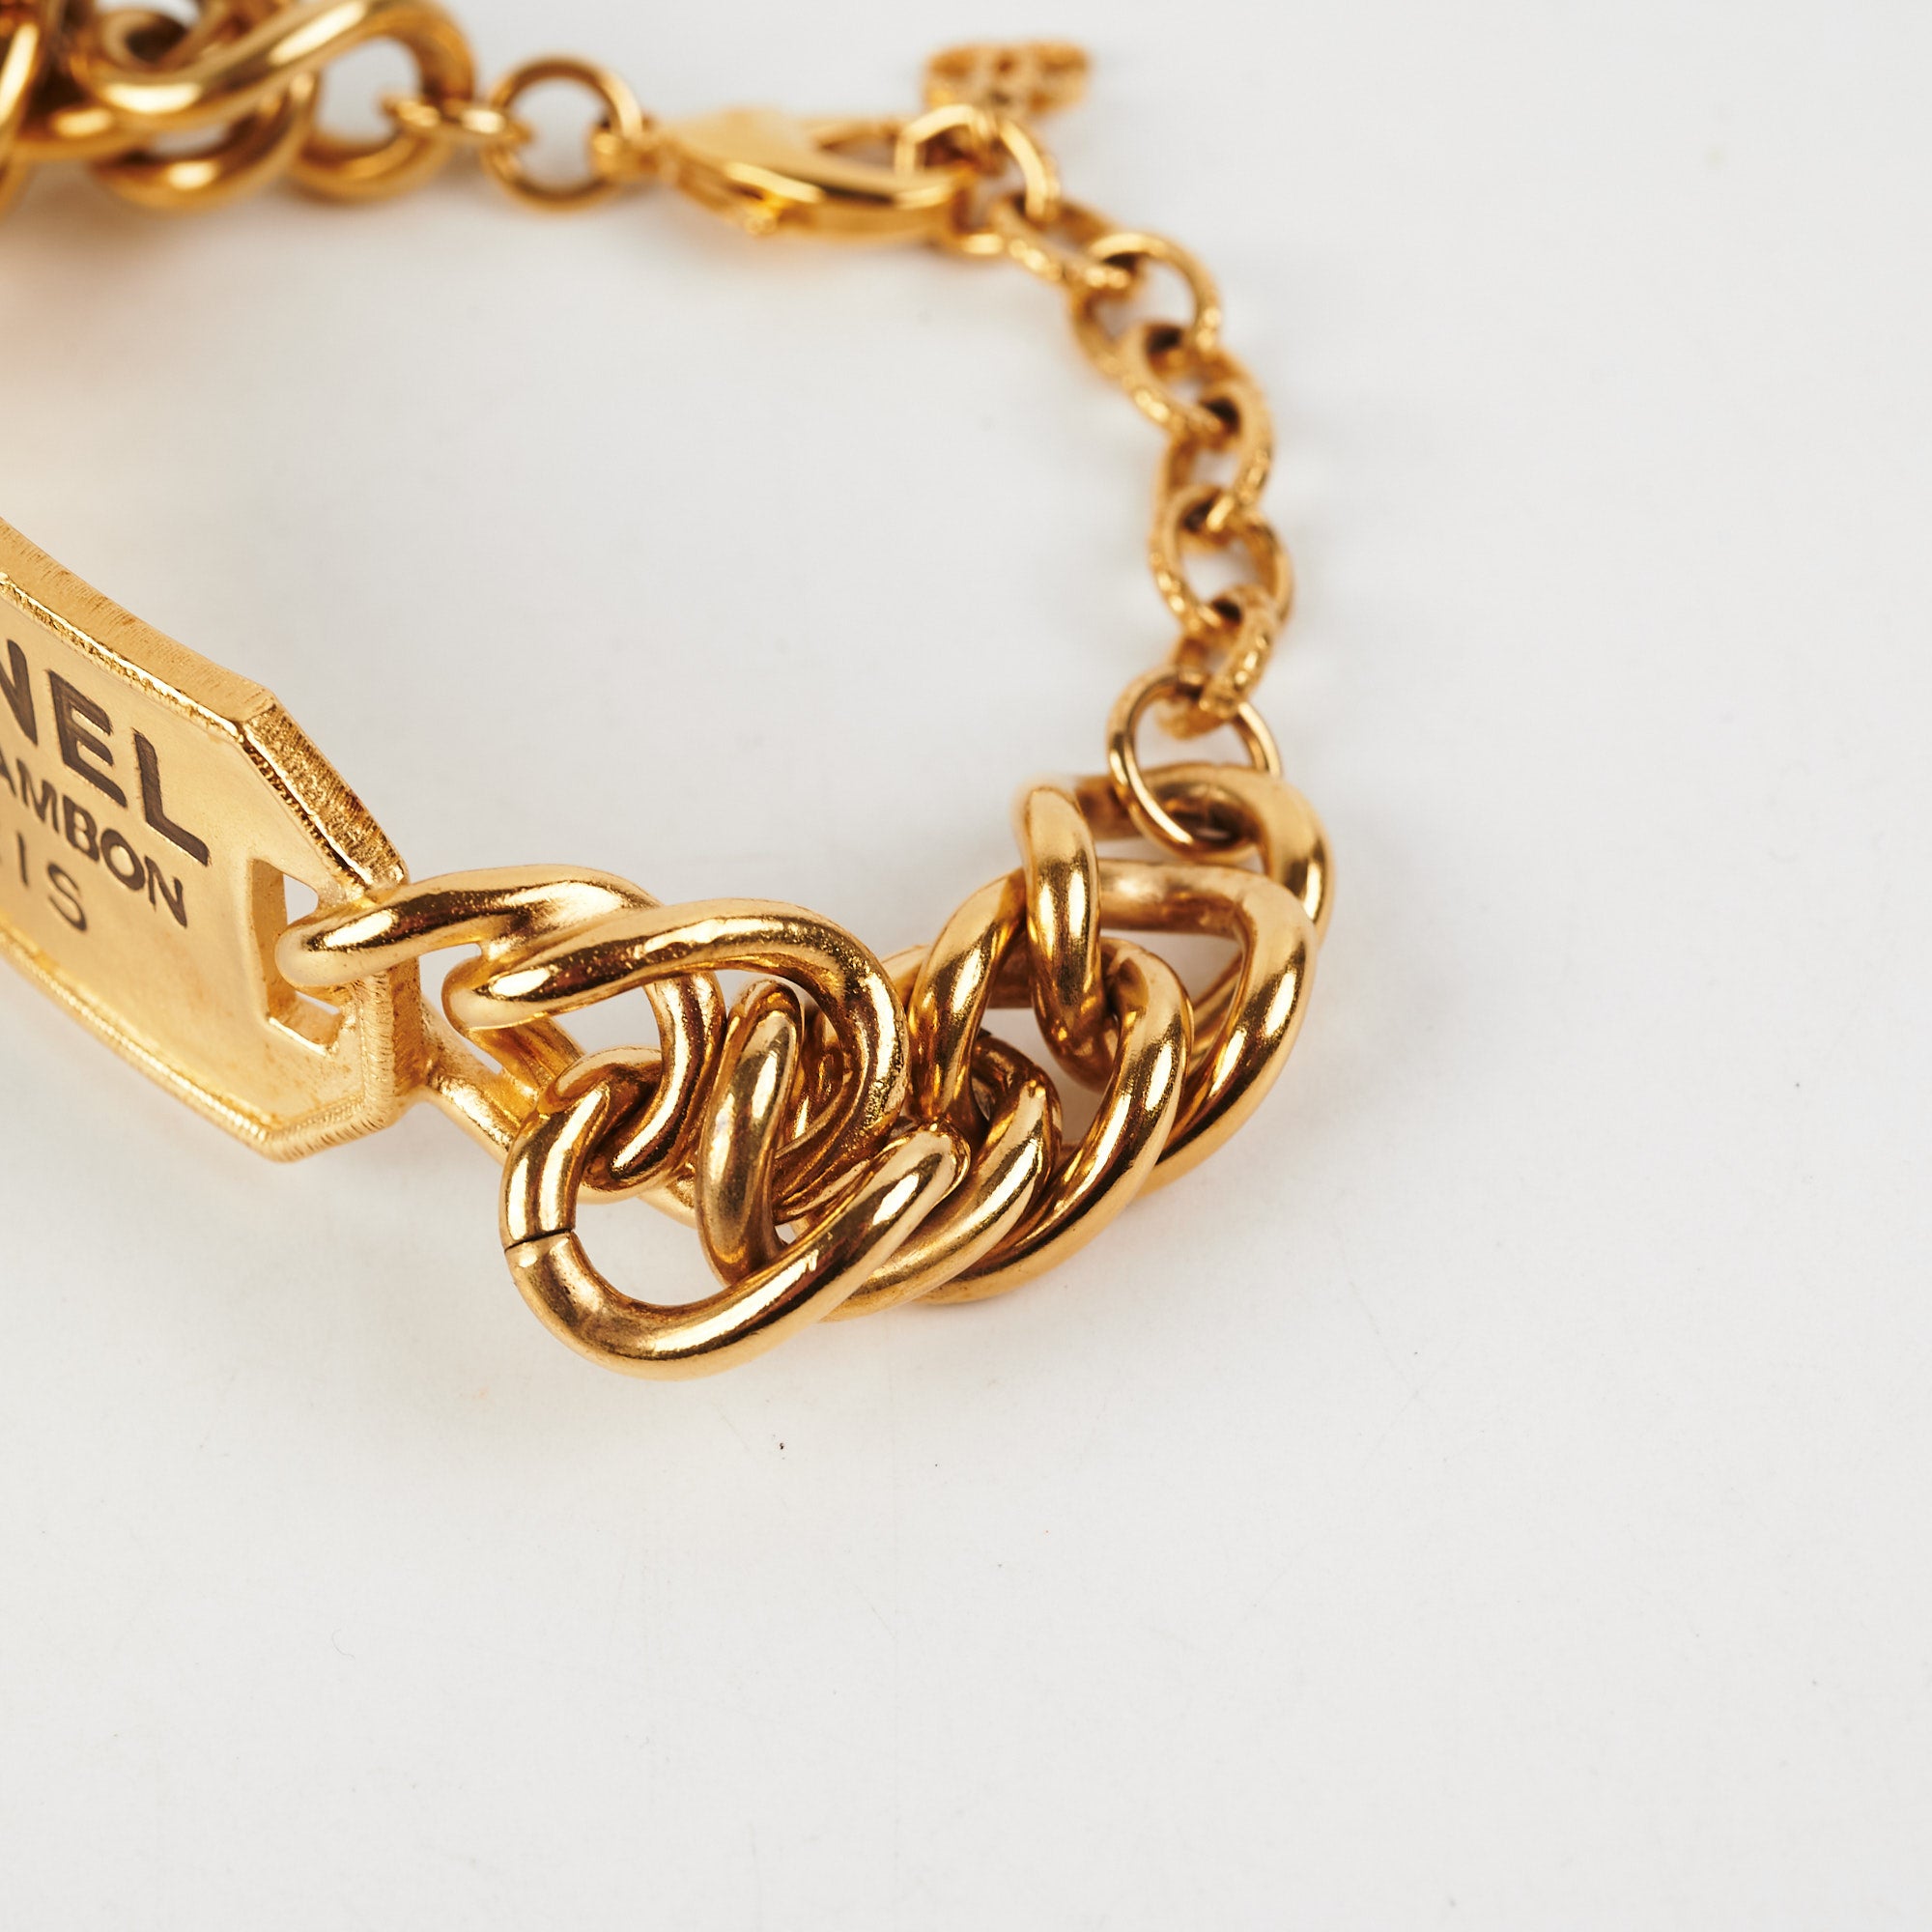 Chanel Vintage GoldTone Metal Chanel Bangle  Rent Chanel jewelry for  55month